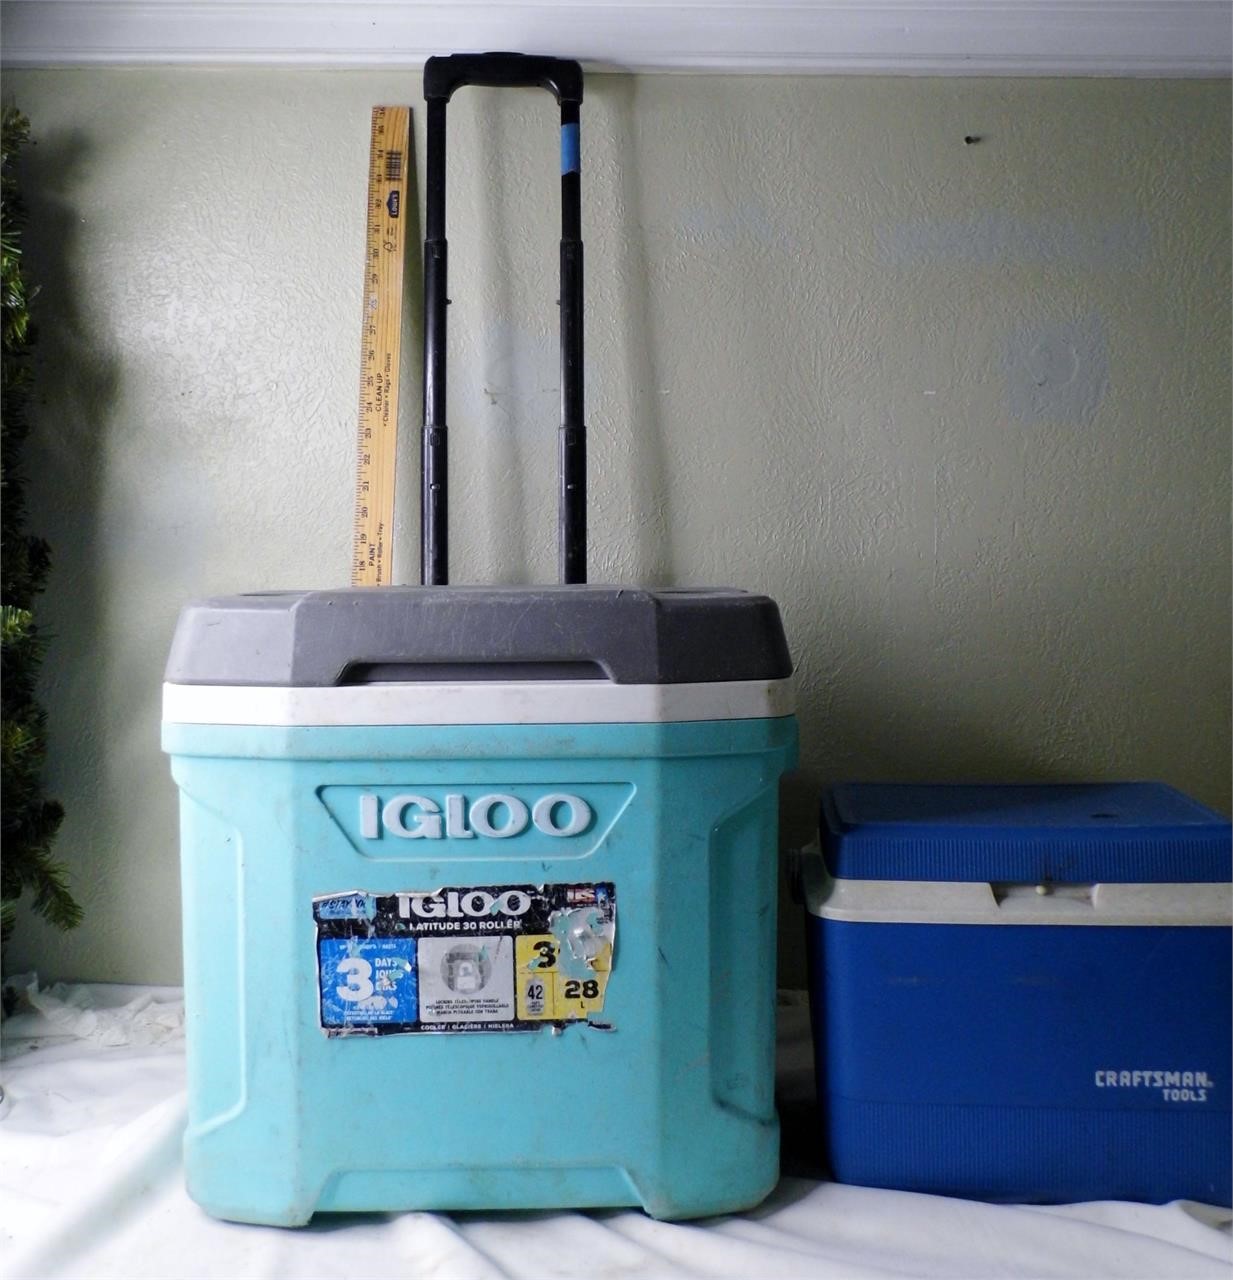 Igloo & Craftsman Coolers As Shown